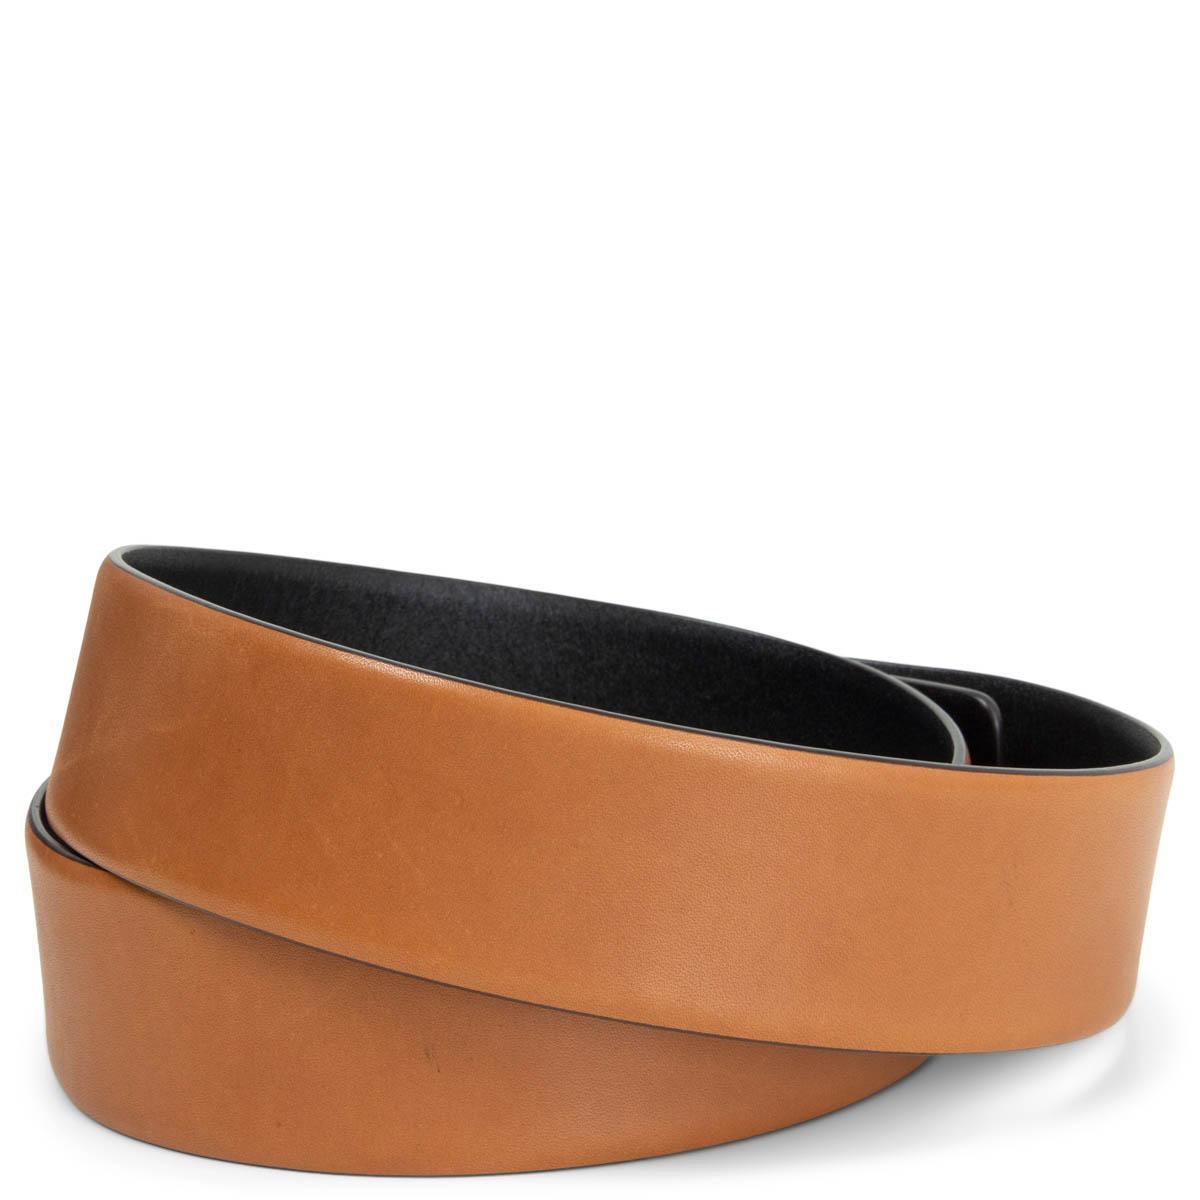 100% authentic Céline by Phoebe Philo waist belt in caramel brown smooth calfskin with gold chain & metal peg toggle closure. Has been worn and shows some faint scratches on the leather and hardware. Overall in very good condition. 

2012